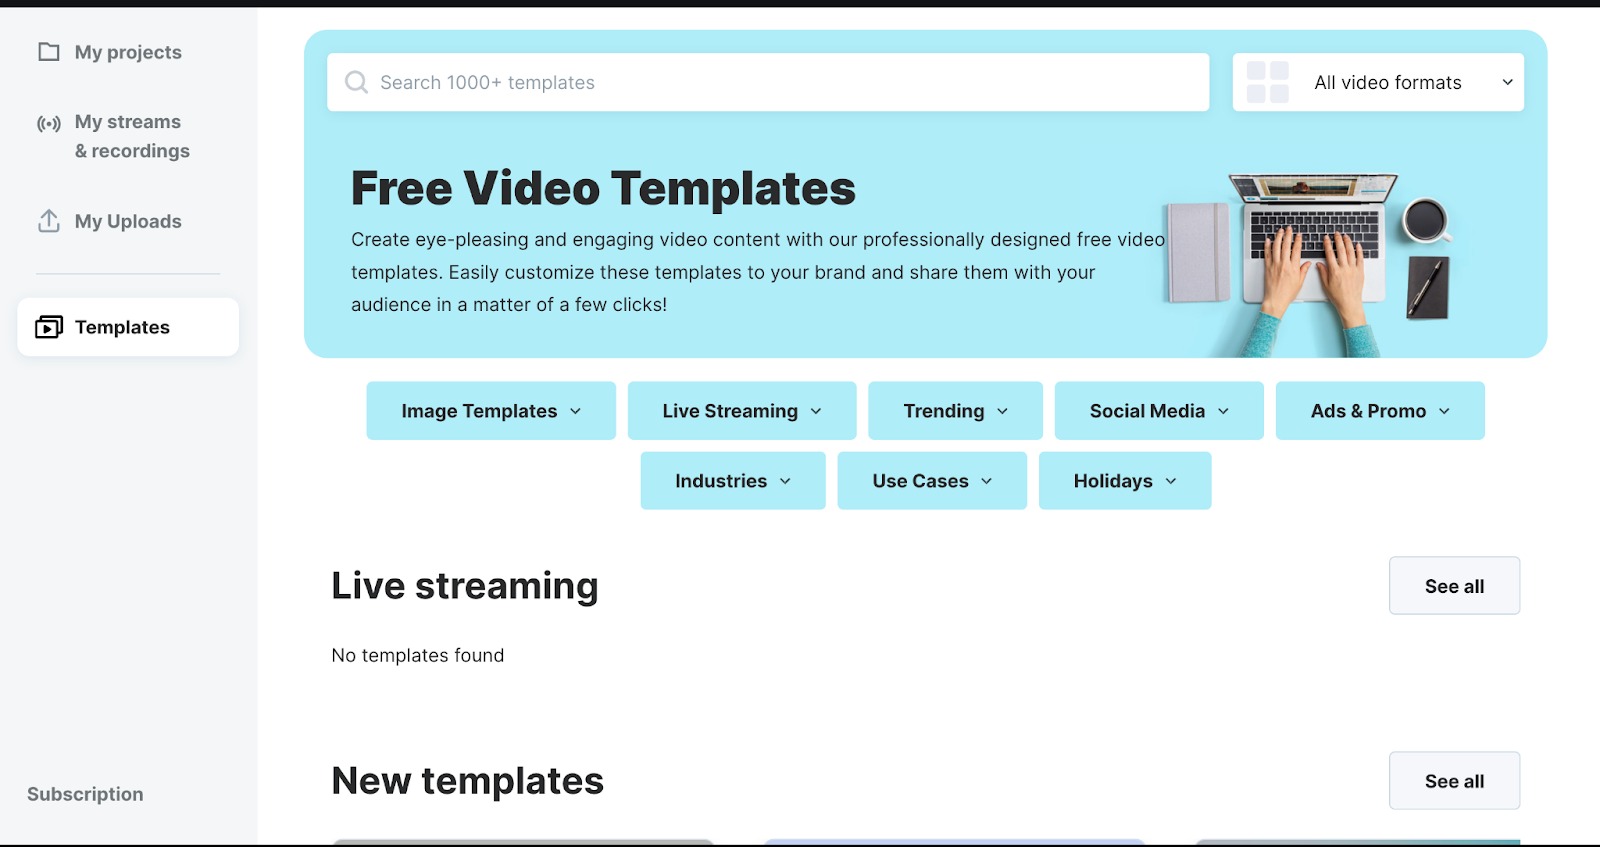 Exploring Video Marketing Platform's free video templates for live streaming.